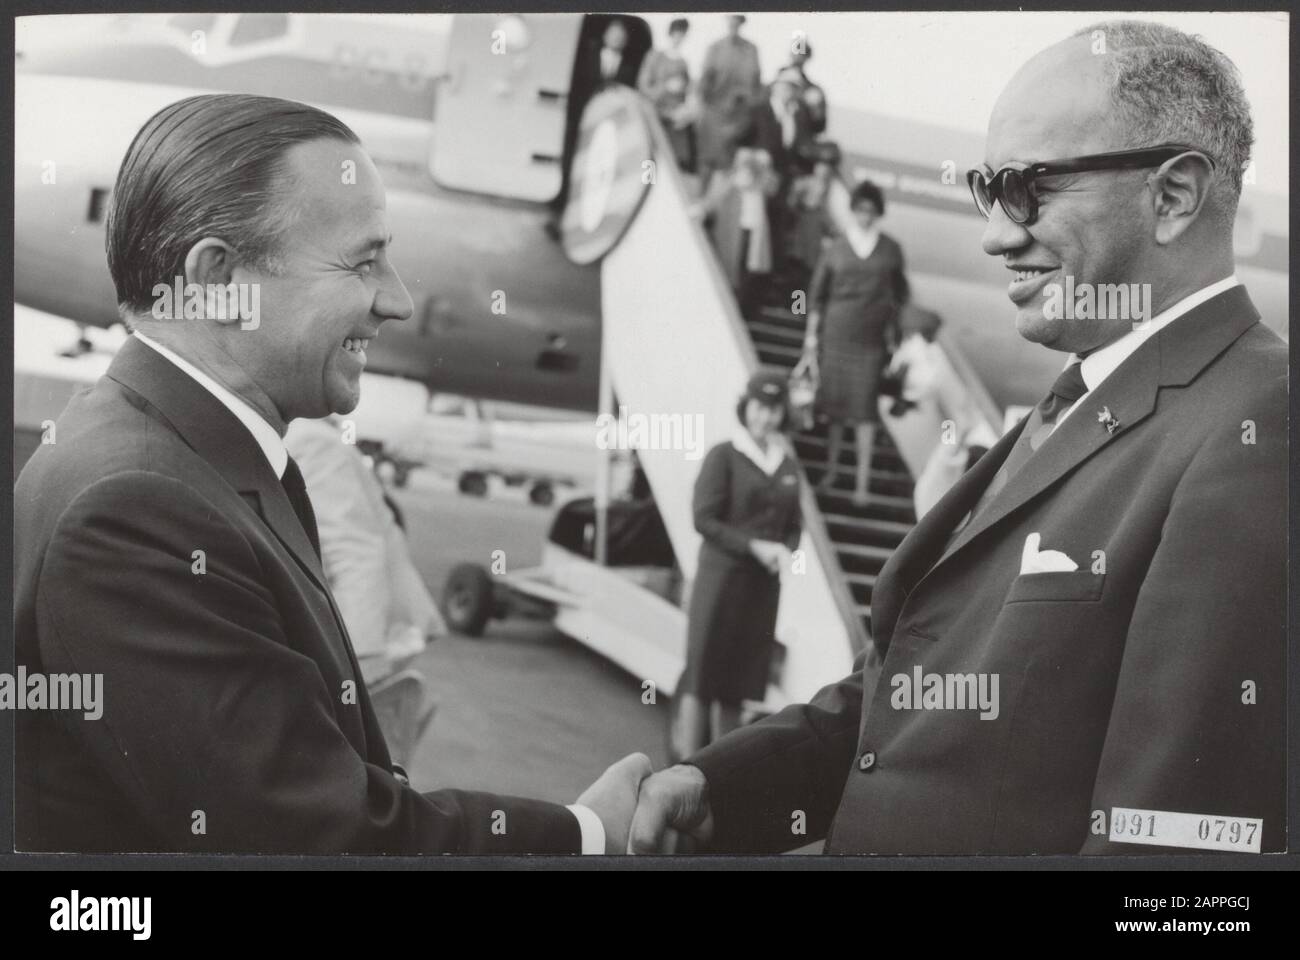 After a tour through America and the West, the Minister of Defense, P.S.J. de Jong arrived at Schiphol Airport. The Minister Plenipotentiary of Suriname Mr. S.D. Emanuels (right) greets the Minister Date: 28 September 1964 Location: Noord-Holland, Schiphol Keywords: ministers, airports Personal name: Emanuels, S.D., Jong, Piet de Stock Photo